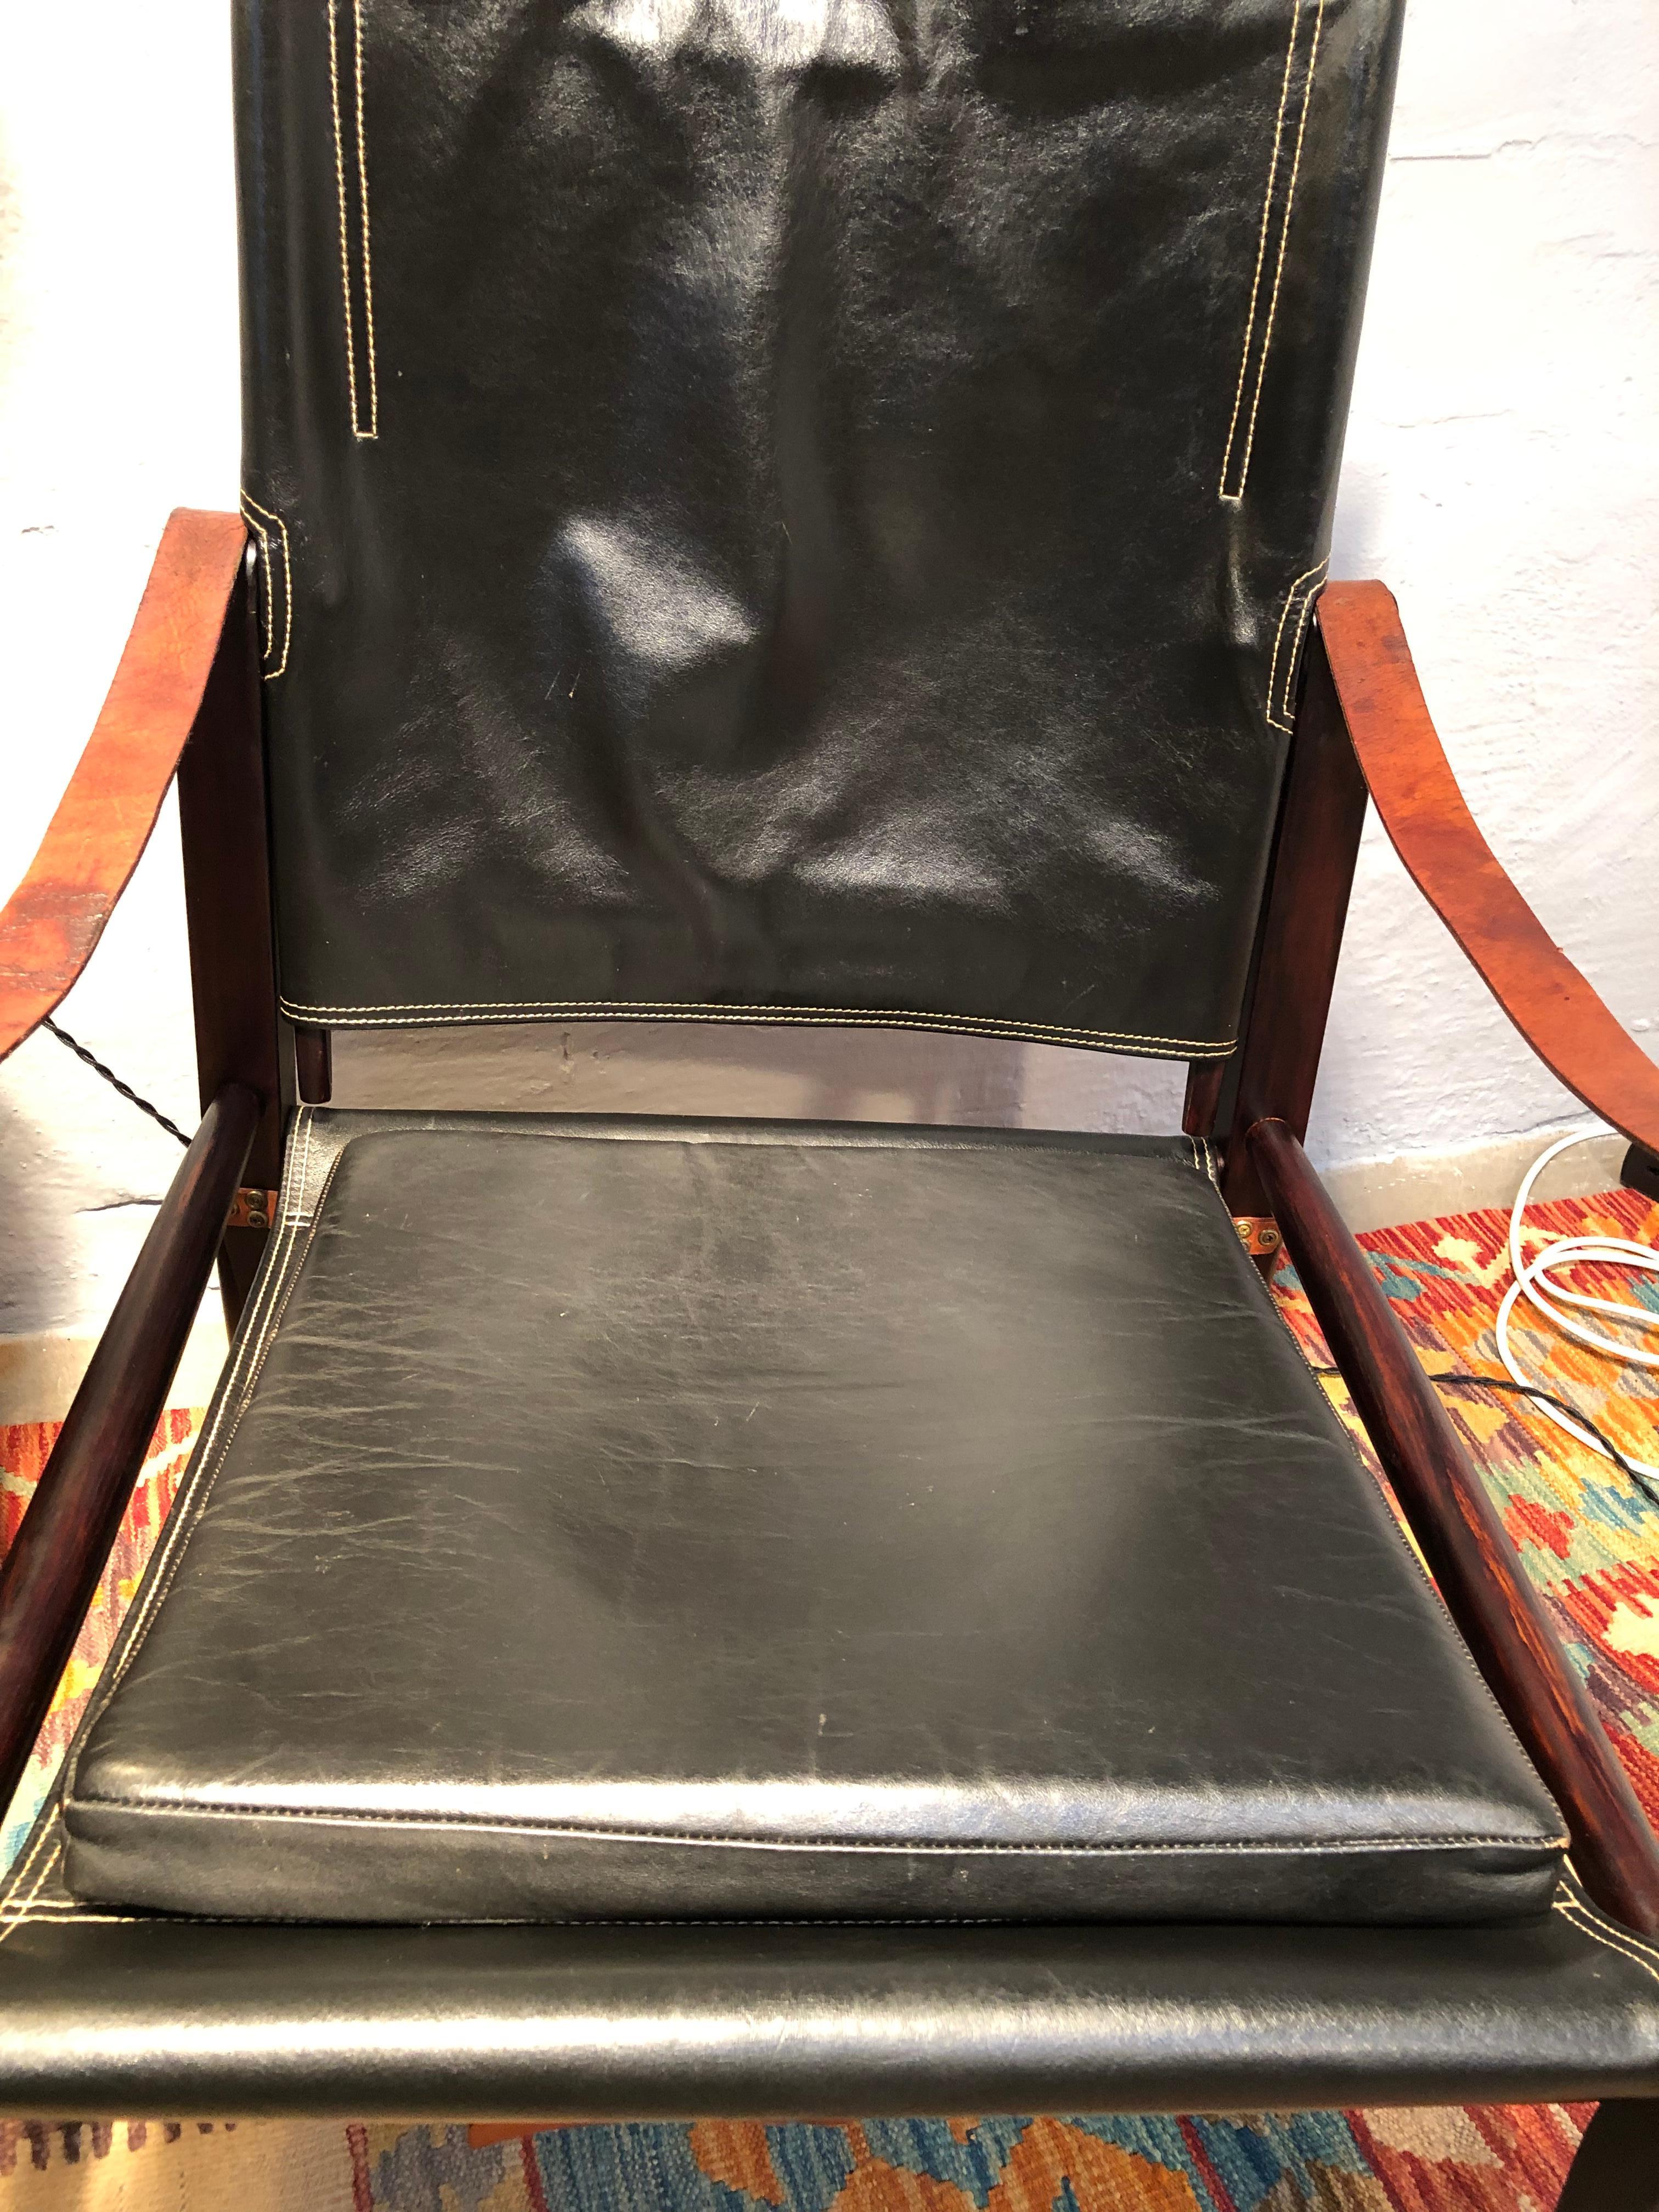 Leather Pair of Kaare Klint Safari Lounge Chairs in Original Condition from the 1960s